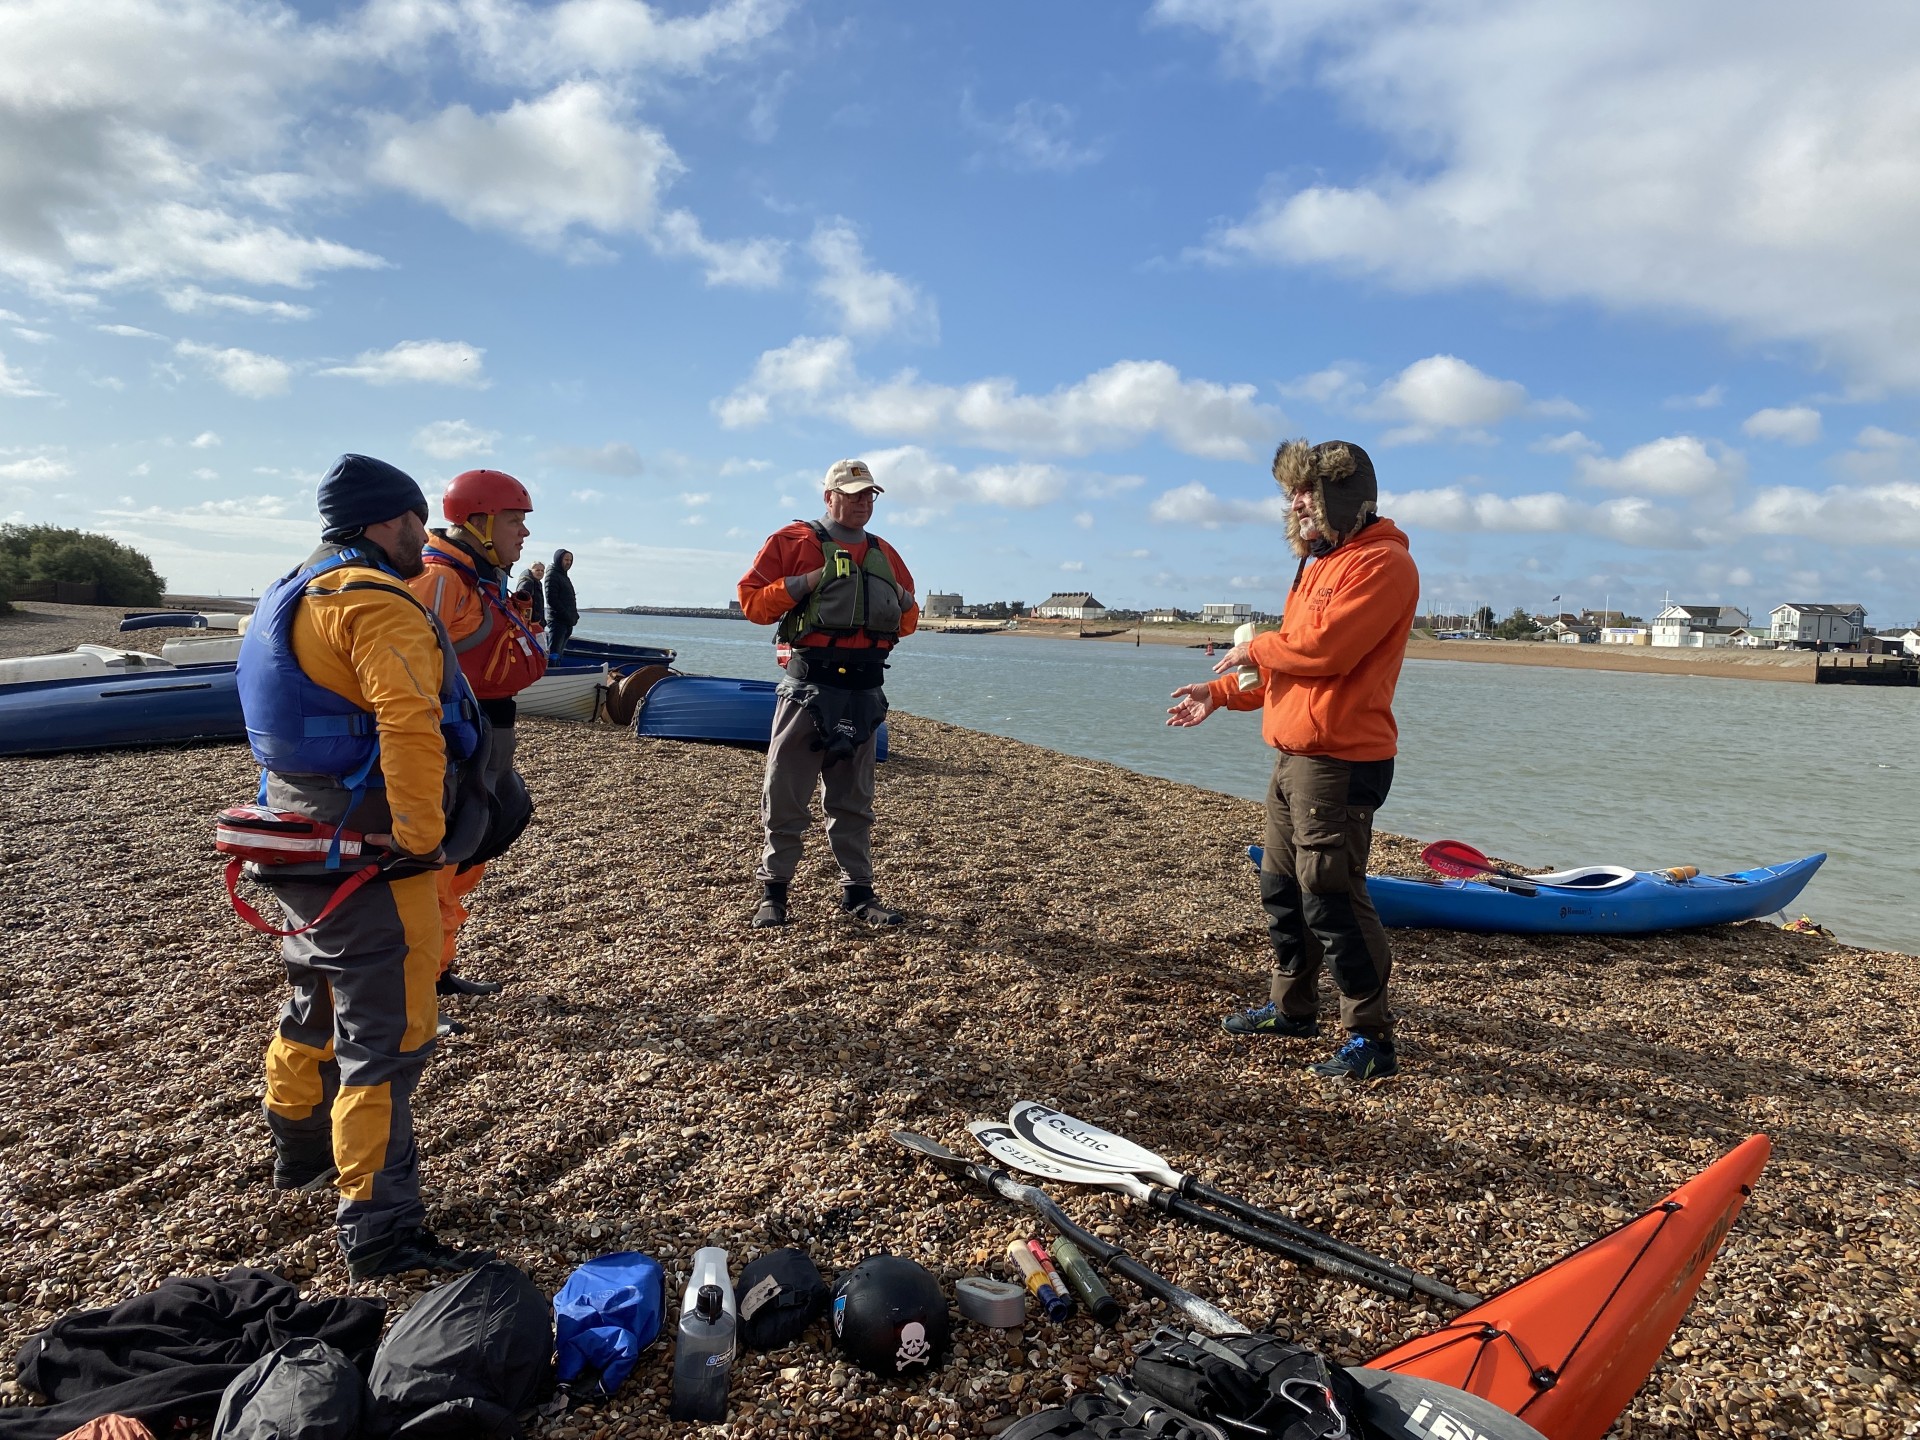 Sea kayakers safety briefing prior to launch on the Intermediate Sea Kayaking course.